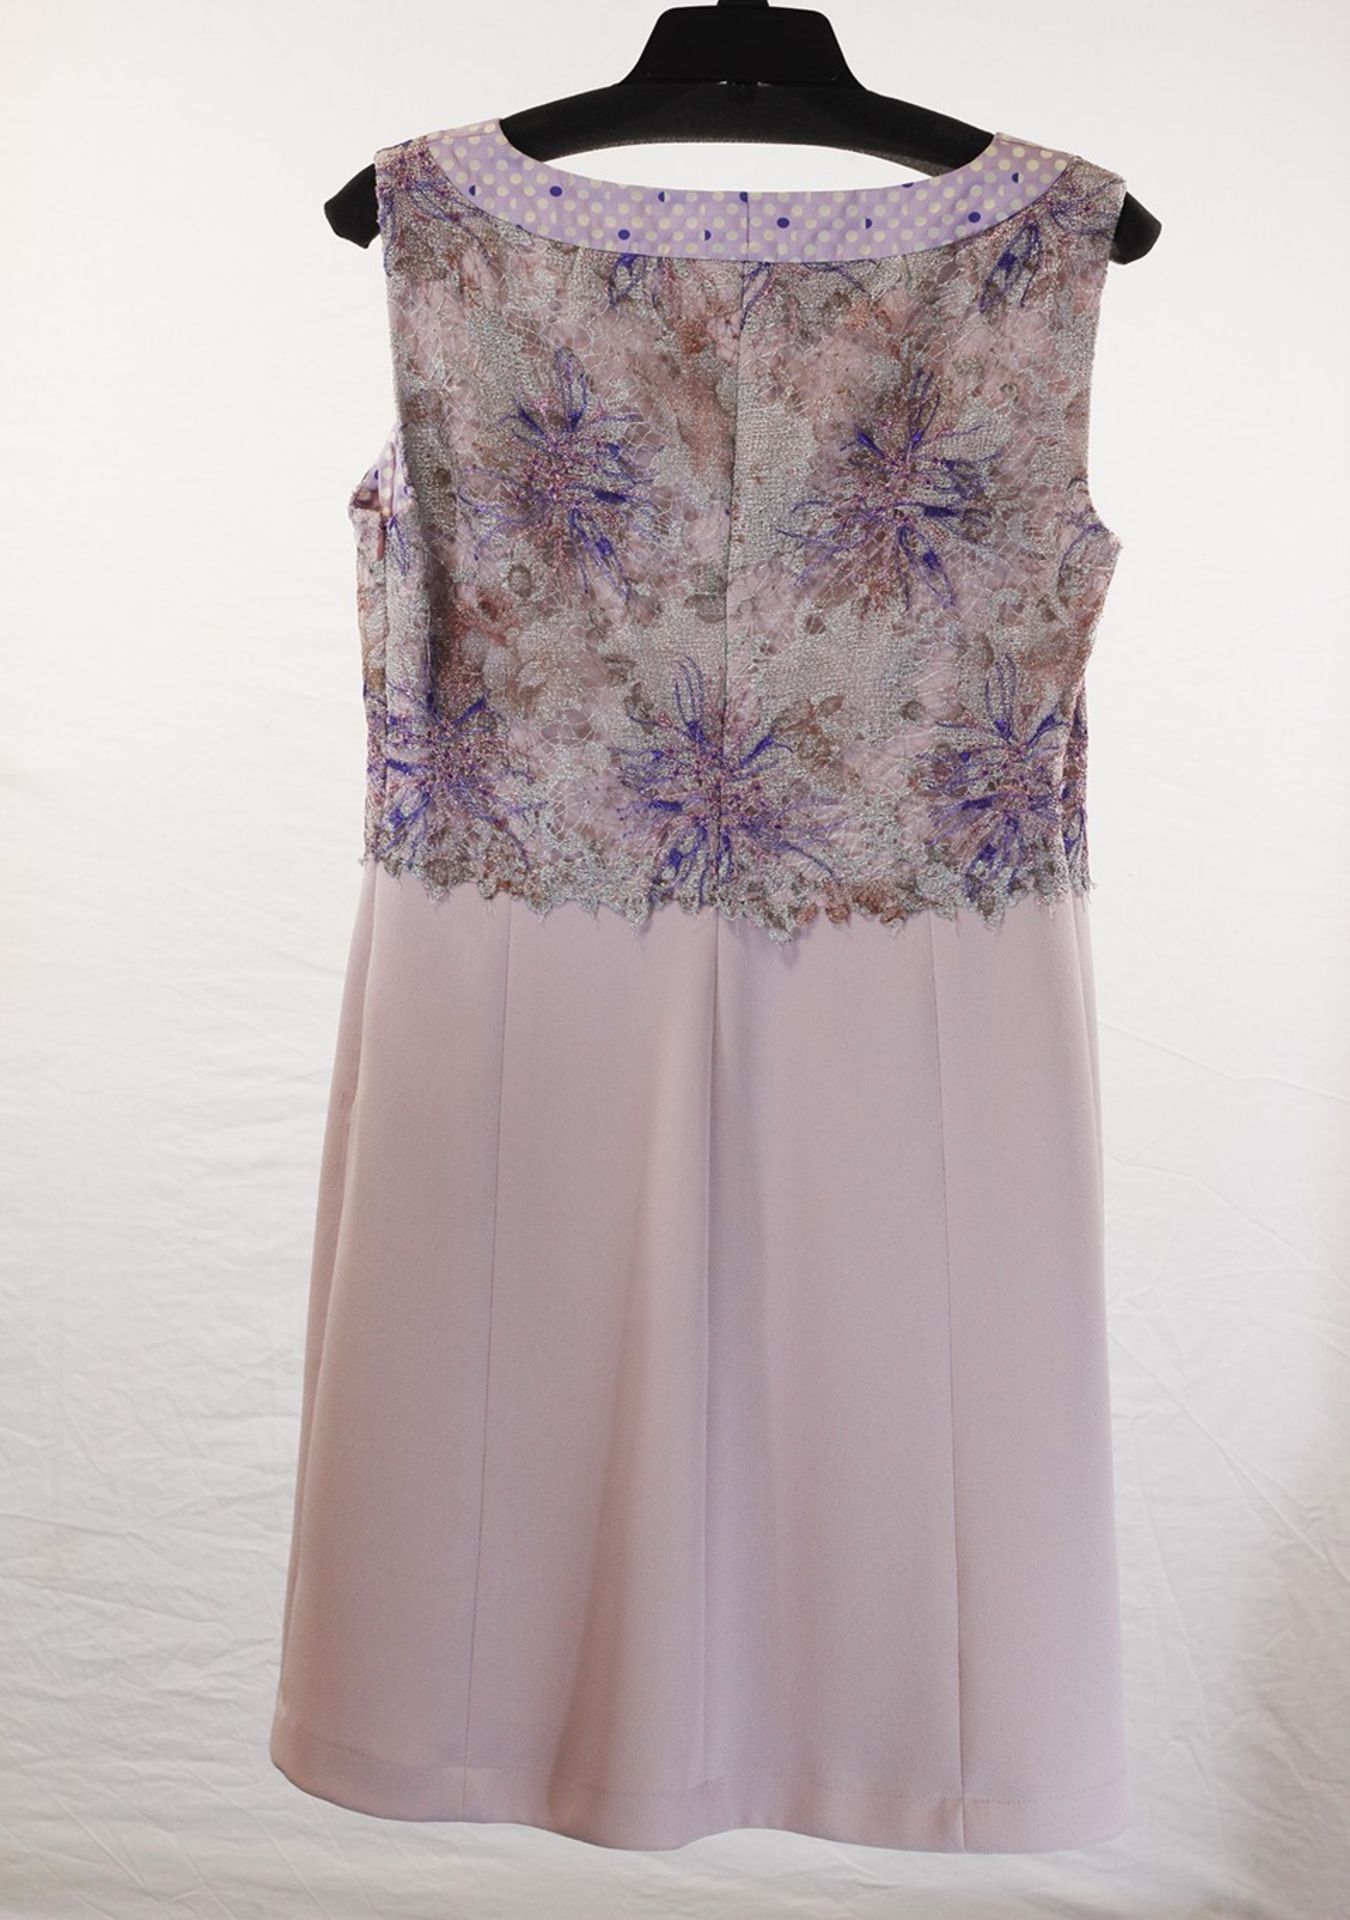 1 x Anne Belin Lilac Dress - Size: 16 - Material: 100% Polyester - From a High End Clothing Boutique - Image 2 of 8